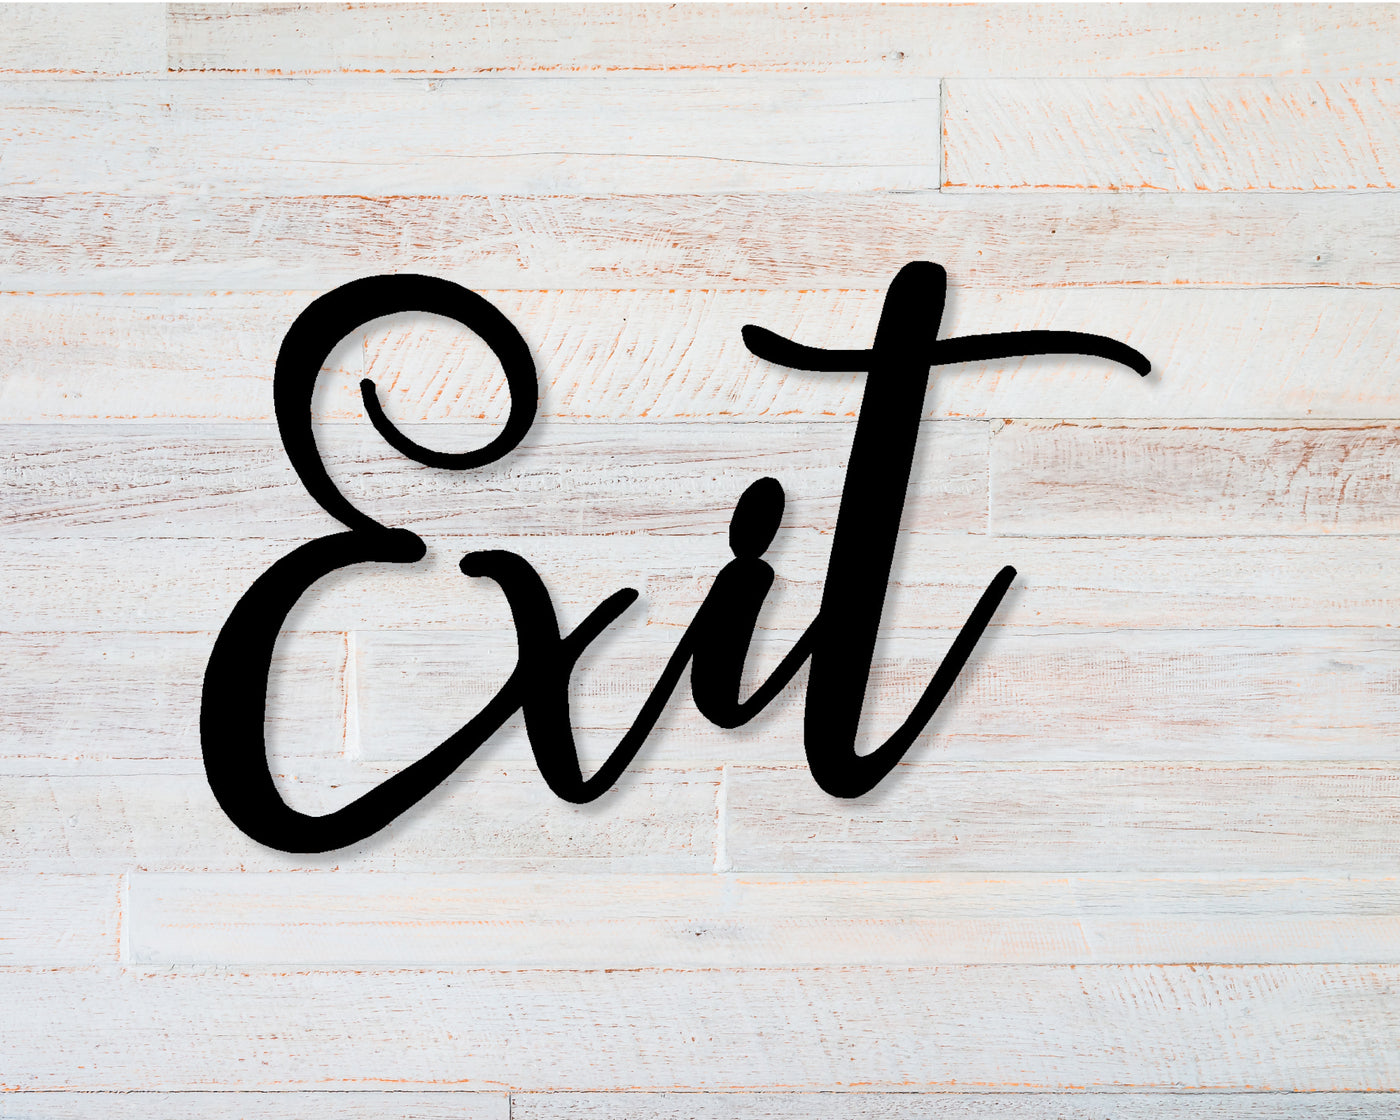 Exit Metal Word Sign - Madison Iron and Wood - Wall Art - metal outdoor decor - Steel deocrations - american made products - veteran owned business products - fencing decorations - fencing supplies - custom wall decorations - personalized wall signs - steel - decorative post caps - steel post caps - metal post caps - brackets - structural brackets - home improvement - easter - easter decorations - easter gift - easter yard decor